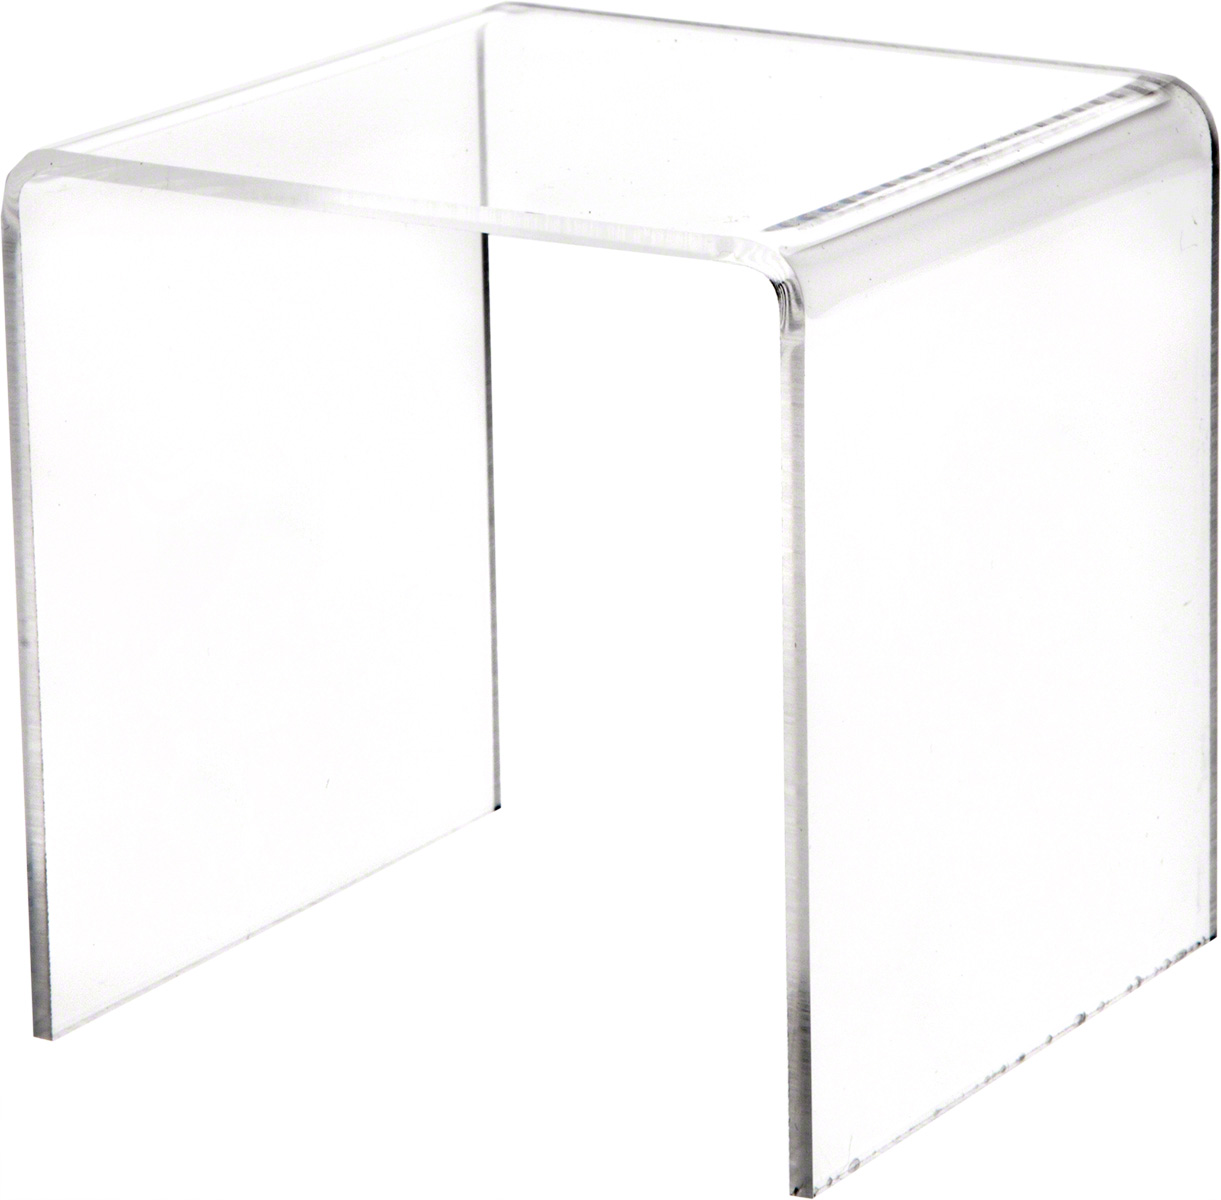 3 Pack 1/8" thick 8"H x 8"W x 8"D Plymor Clear Acrylic Square Display Riser 